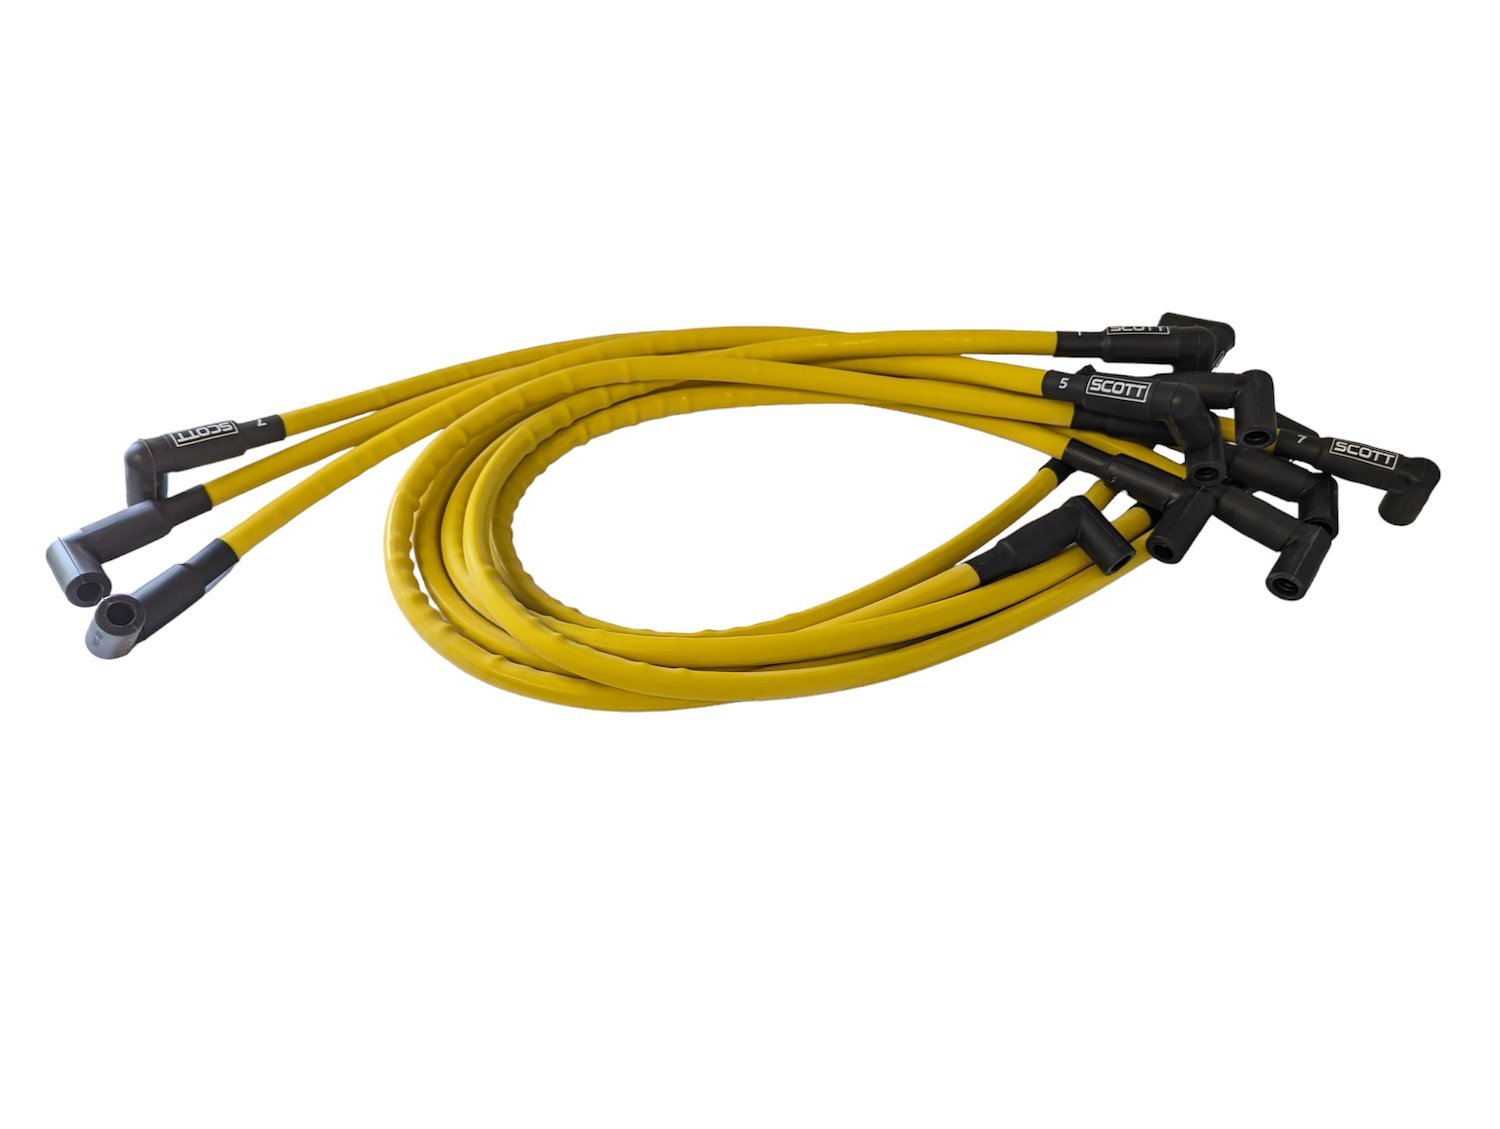 SPW-CH-439-7 High-Performance Silicone-Sleeved Spark Plug Wire Set for Small Block Ford, Under Header [Yellow]